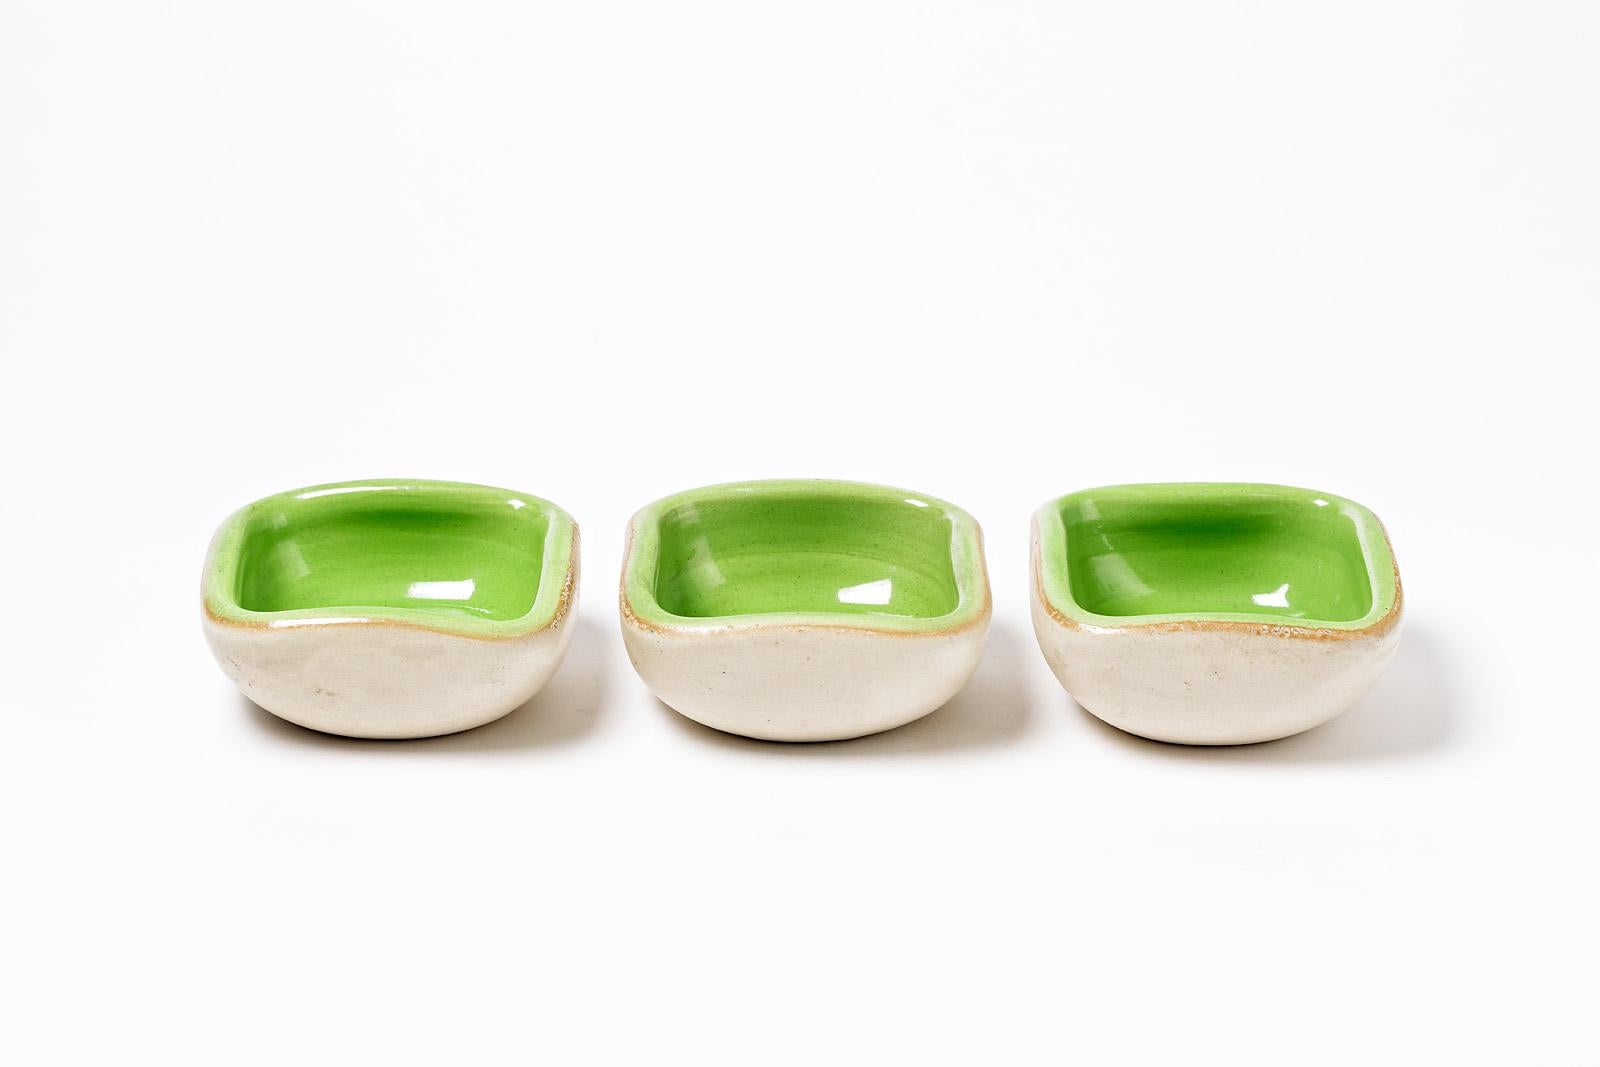 Keramos

Set of three freem forms ceramic dishes by Keramos, circa 1960.

Elegant forms and white and green colors.

Original good conditions.

Dimensions: 5 x 13 x 13cm.